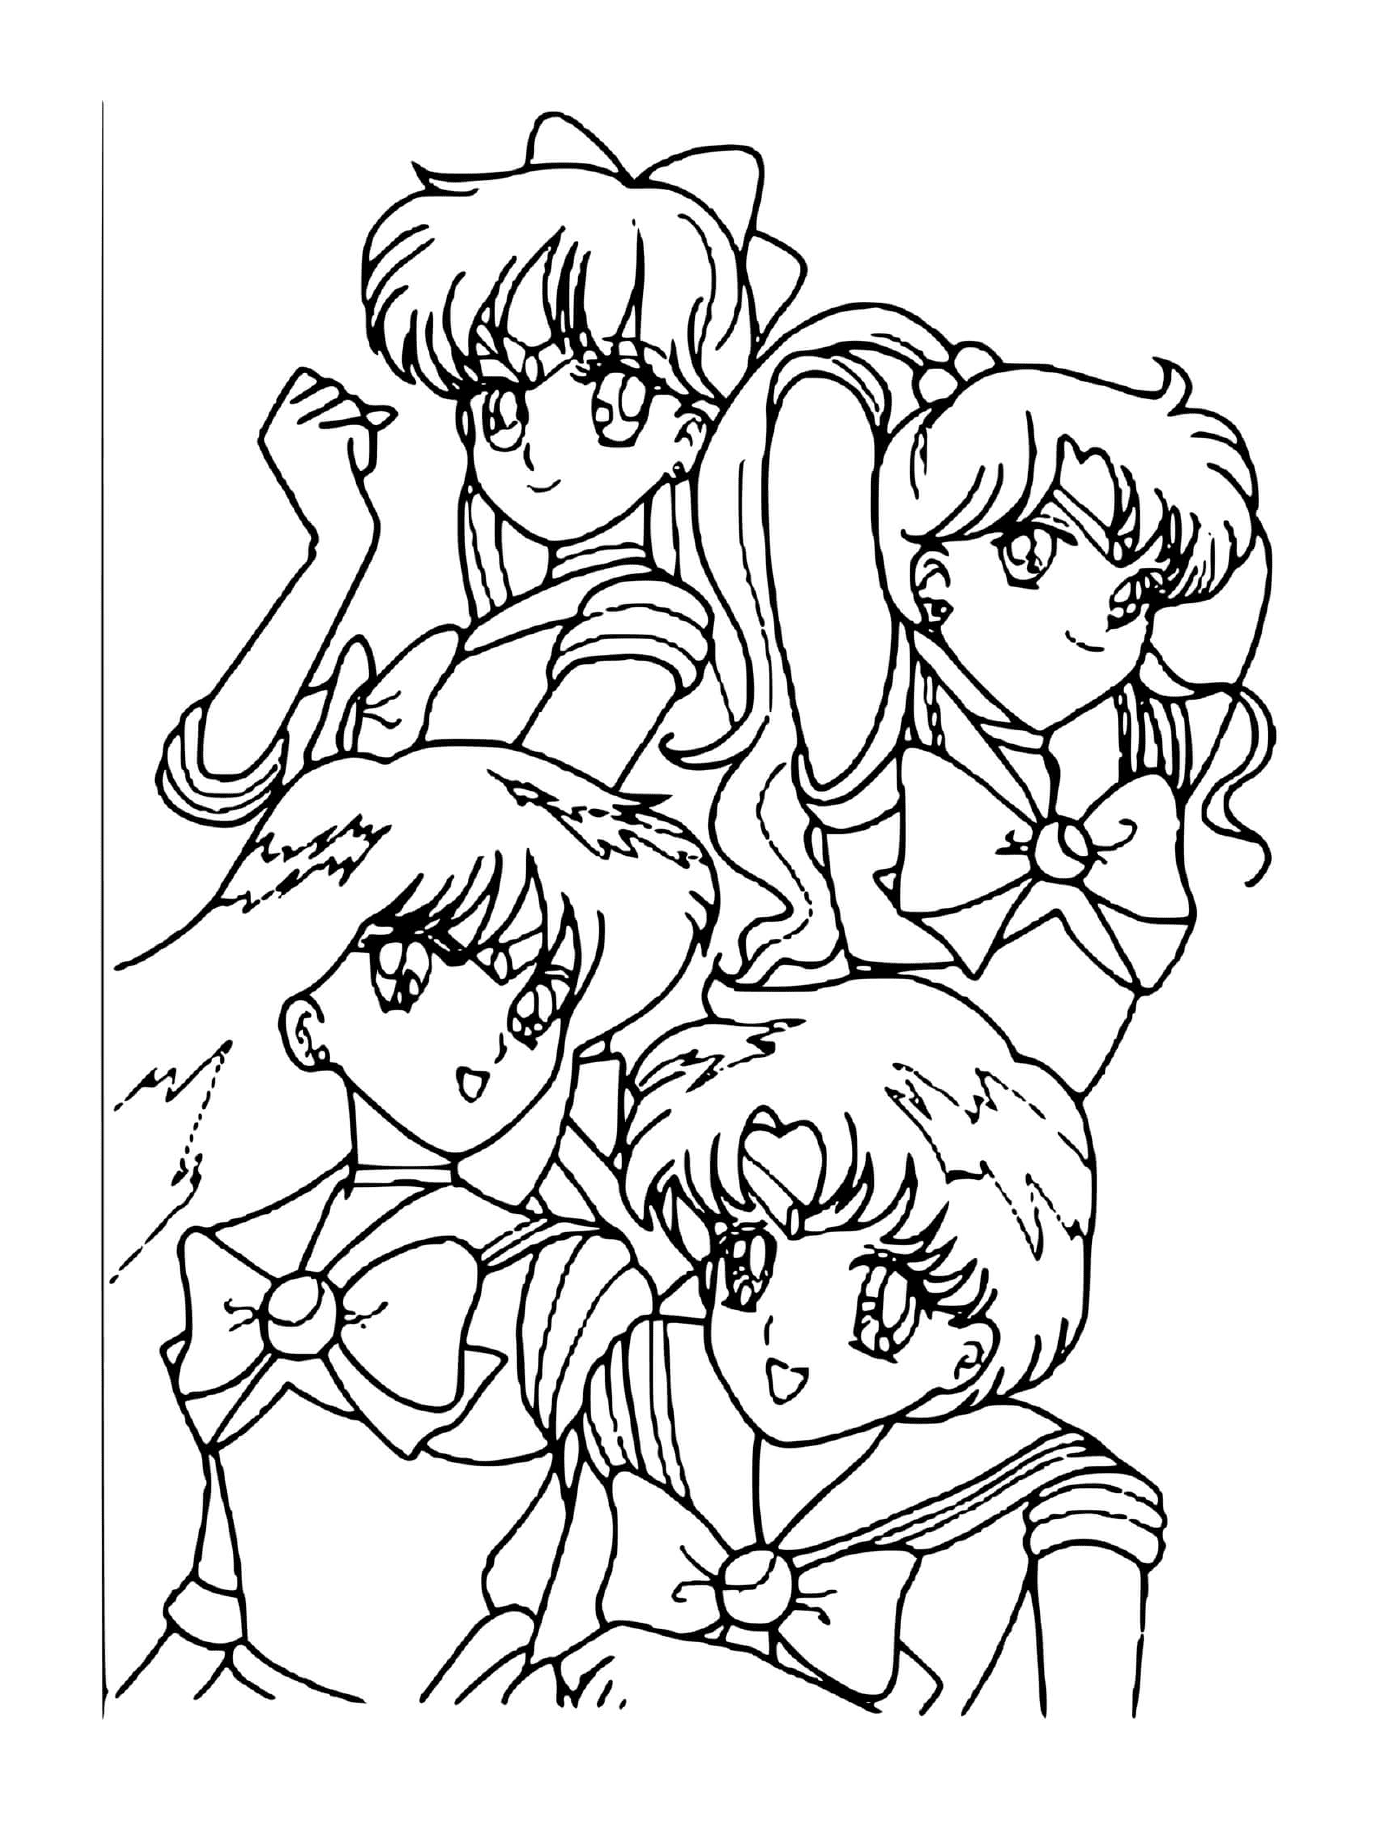  Group of people together with Sailor Moon 